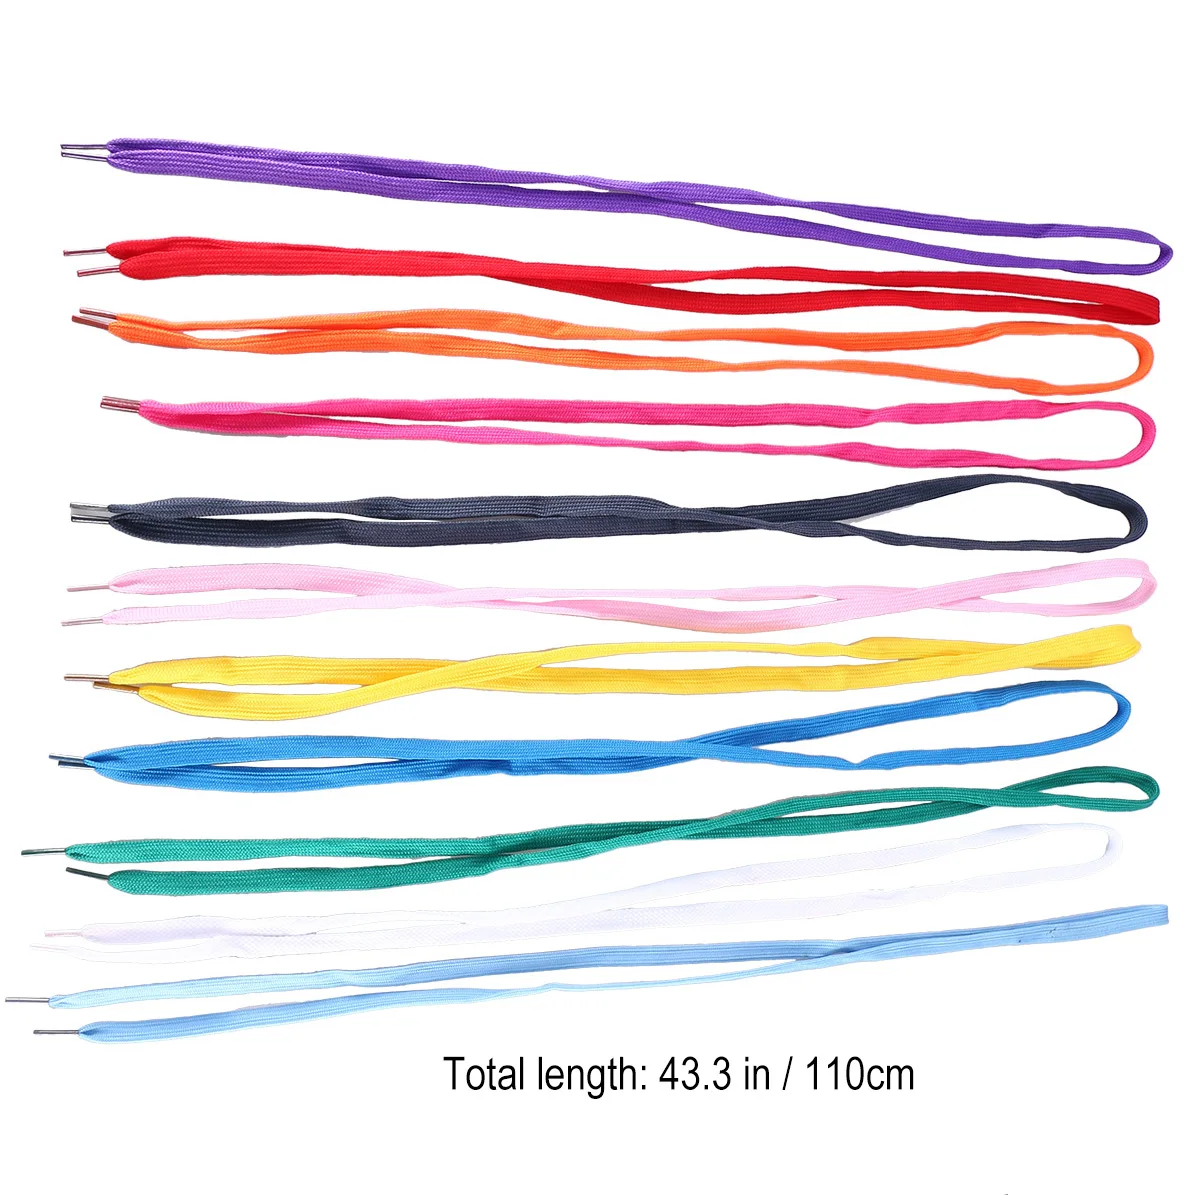 12 Pairs of Replacement Flat Shoelaces Sport Shoe Laces Strings Sneakers Boots 